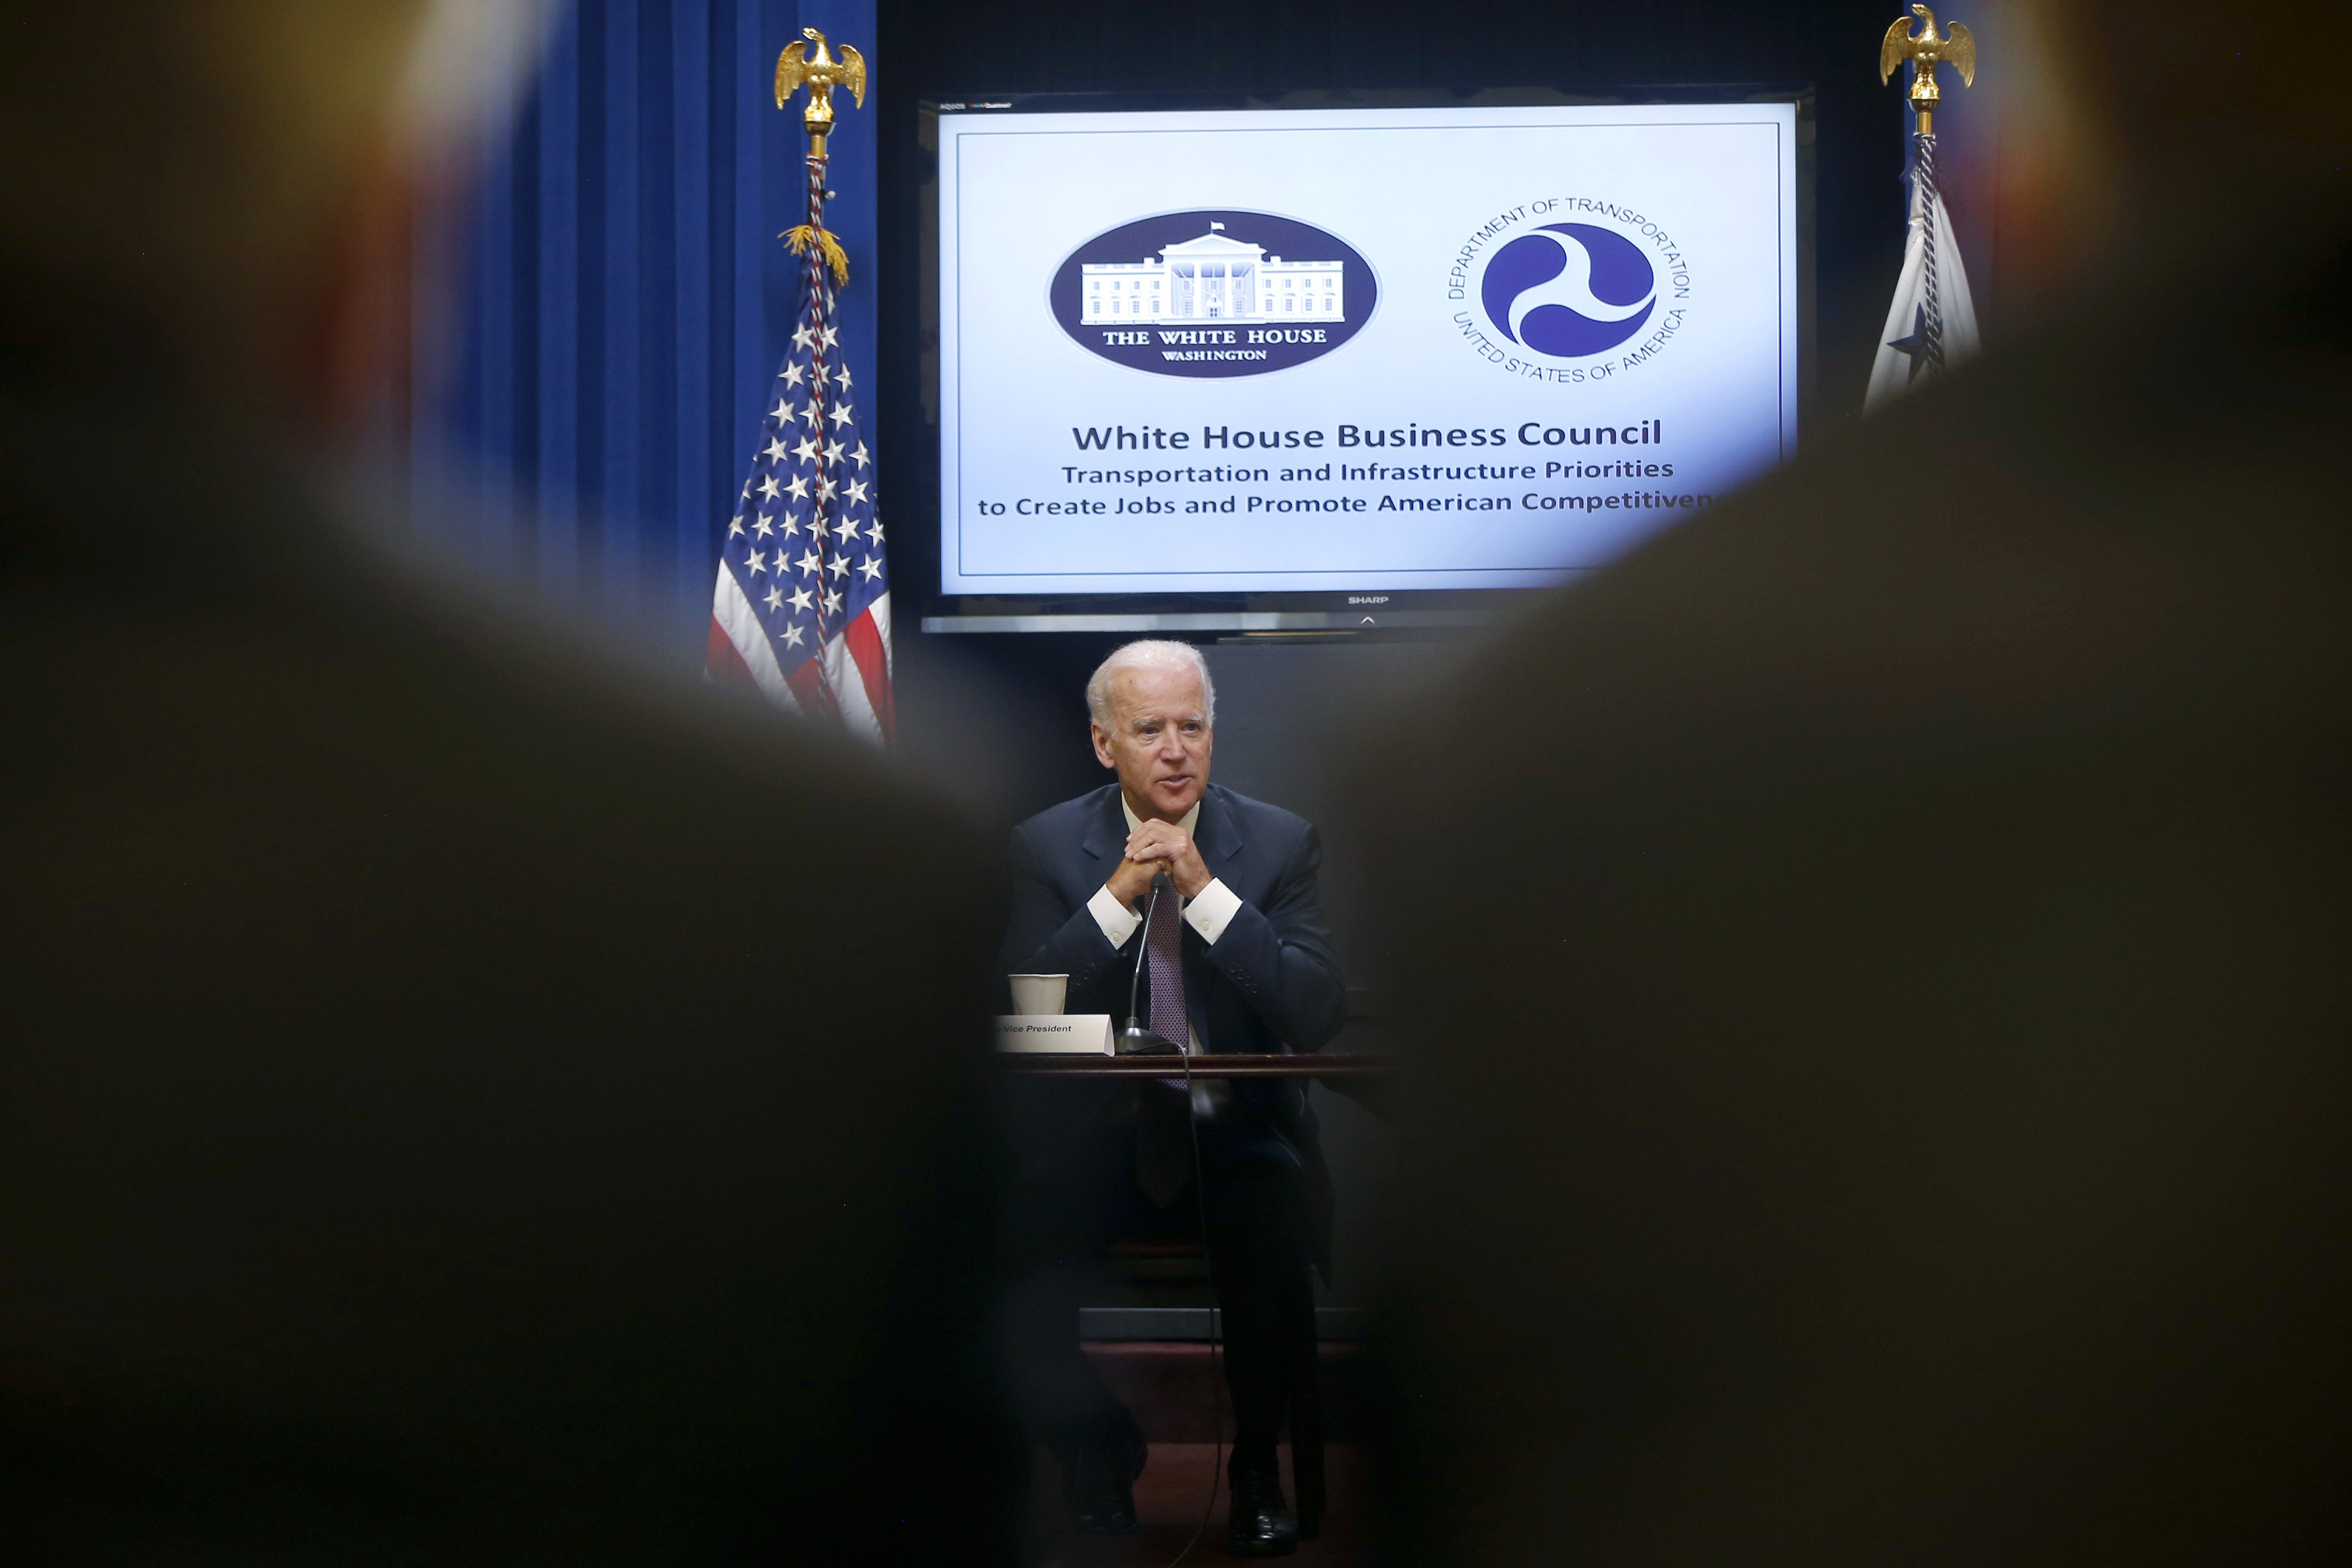 Vice President Joe Biden speaks to government and business officials about transportation infrastructure and the Highway Trust Fund at a meeting hosted by the White House Business Council, Wednesday, July 9, 2014, in the Eisenhower Executive Office Building on the White House complex in Washington. (Charles Dharapak—AP)